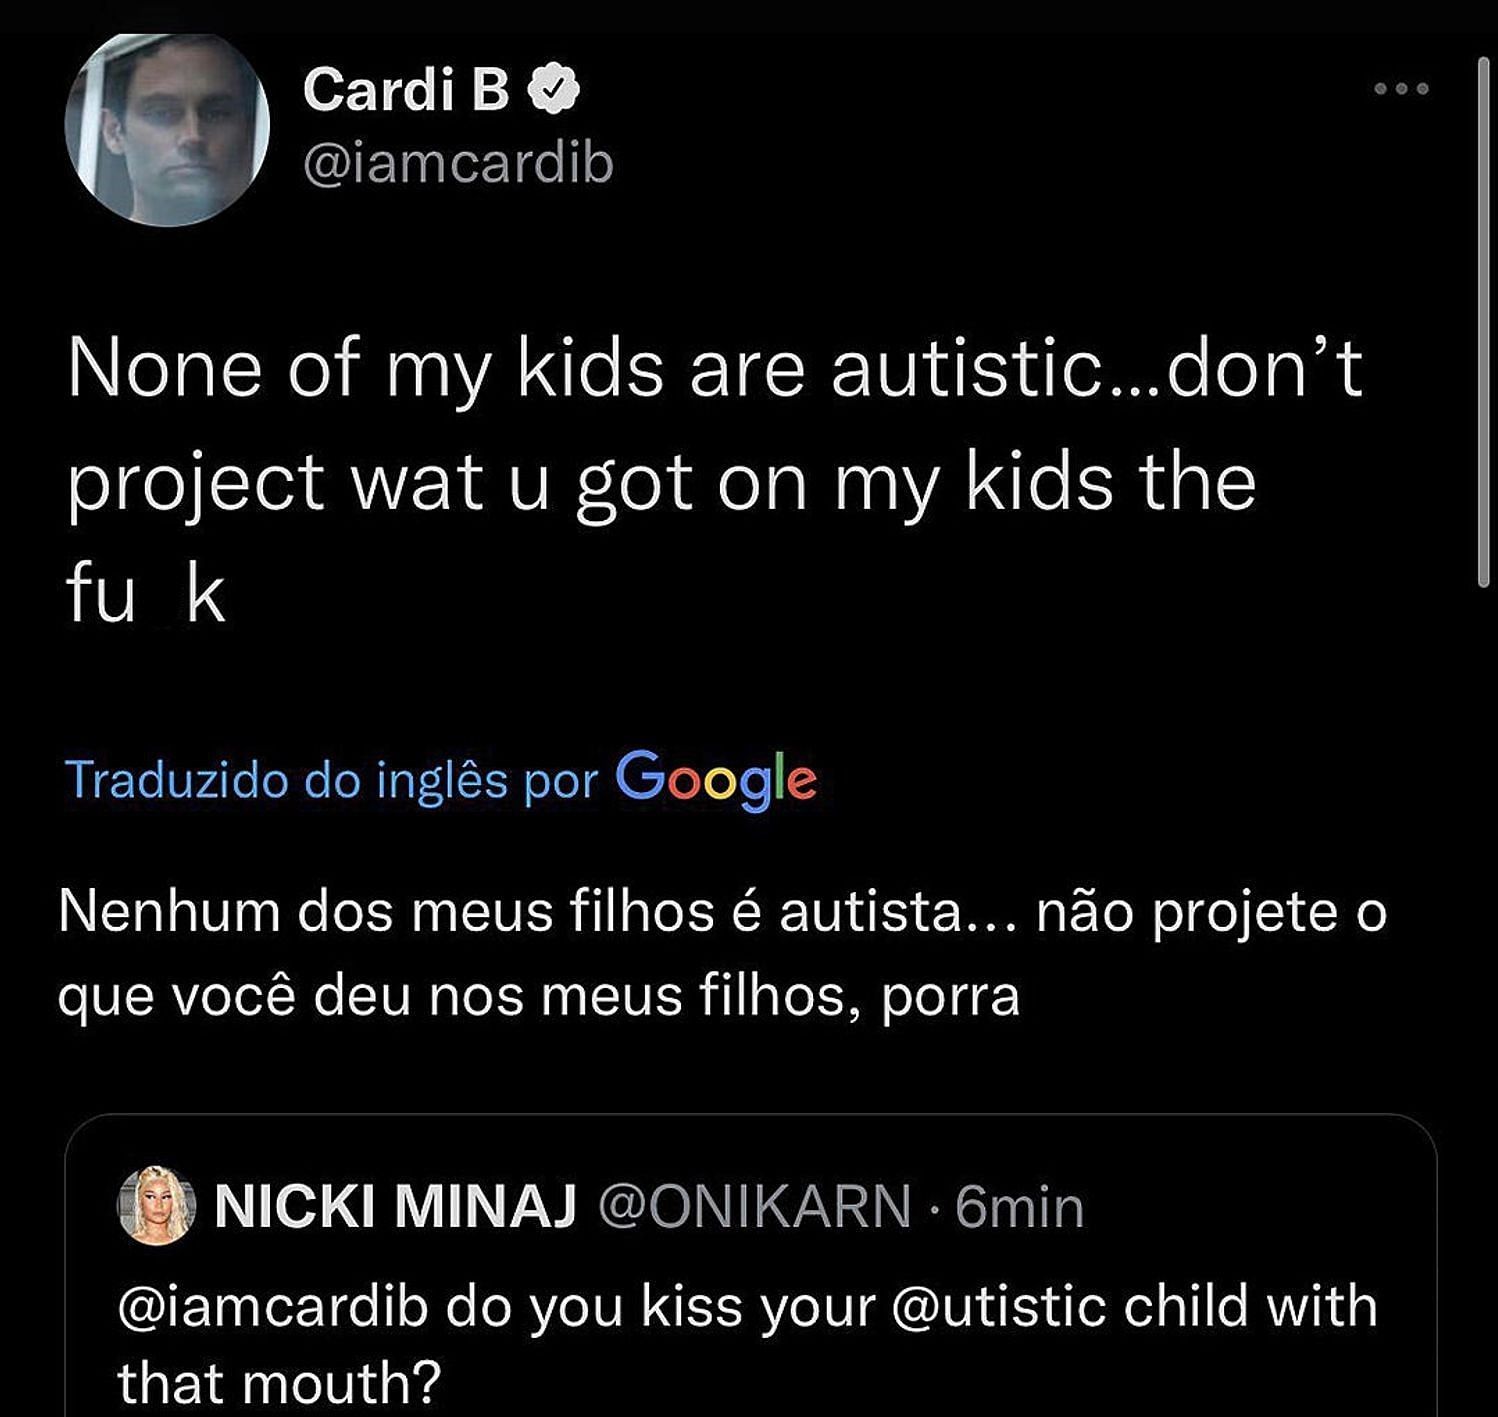 Cardi B responds to her child being called autistic (Image via Twitter)